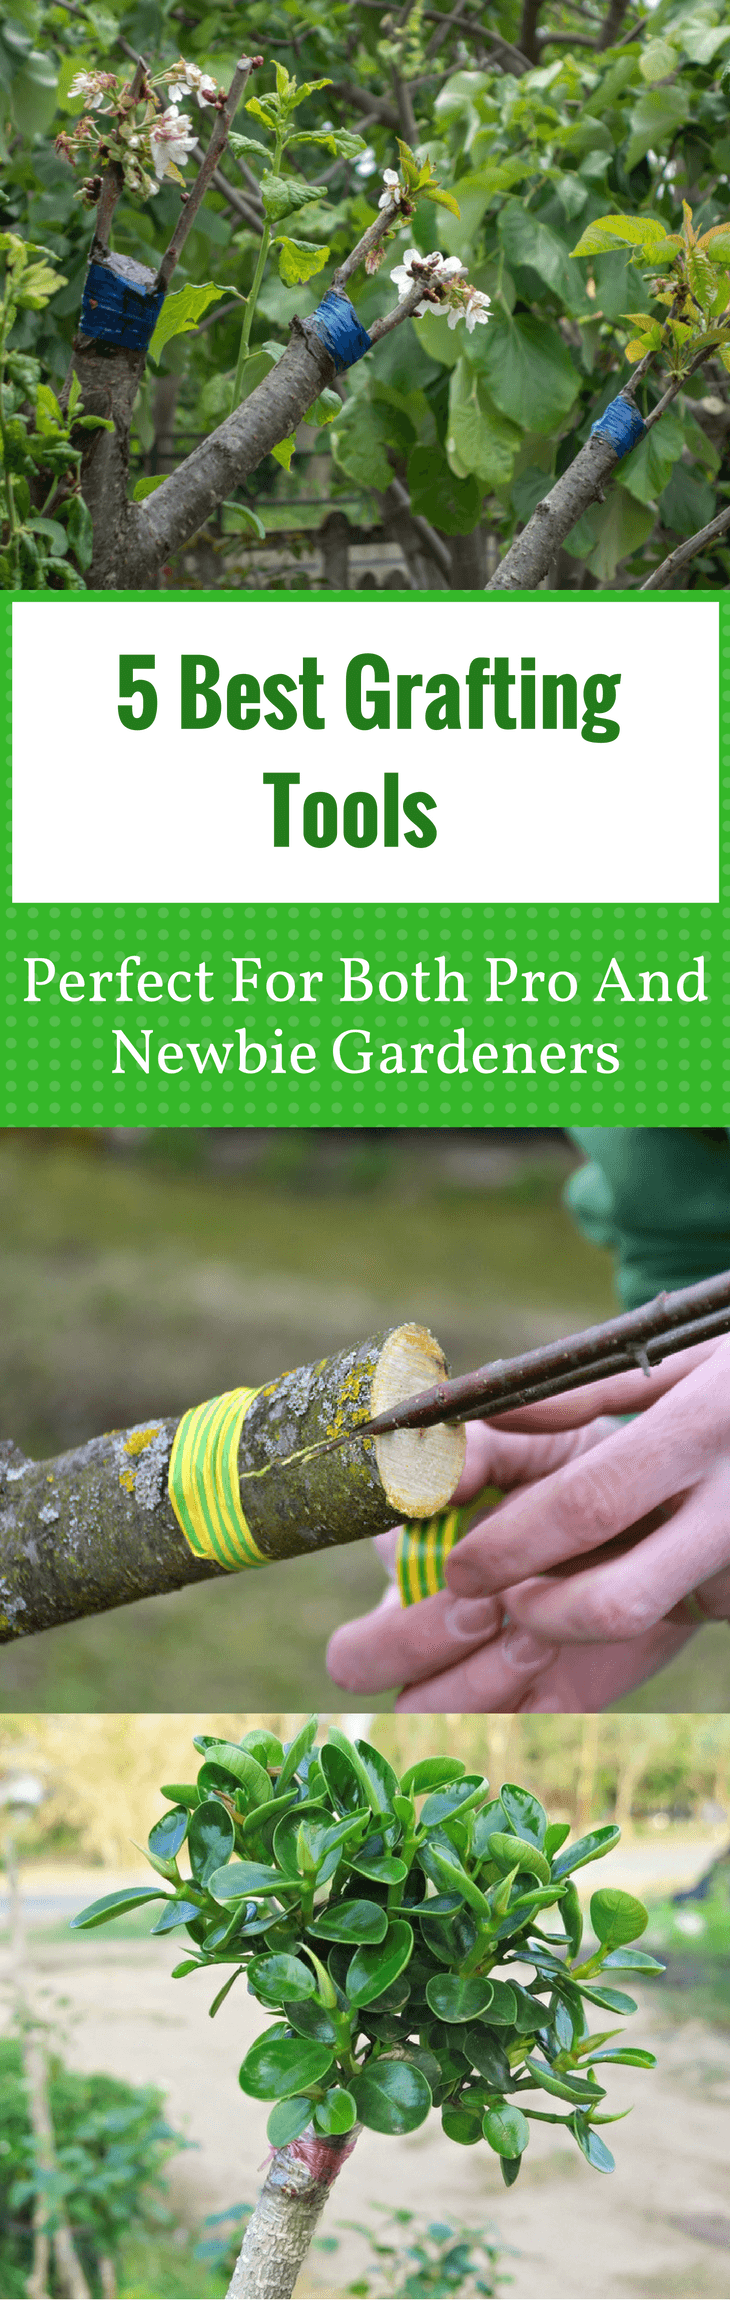 5 Best Grafting Tools Perfect For Both Pro And Newbie Gardeners pin it